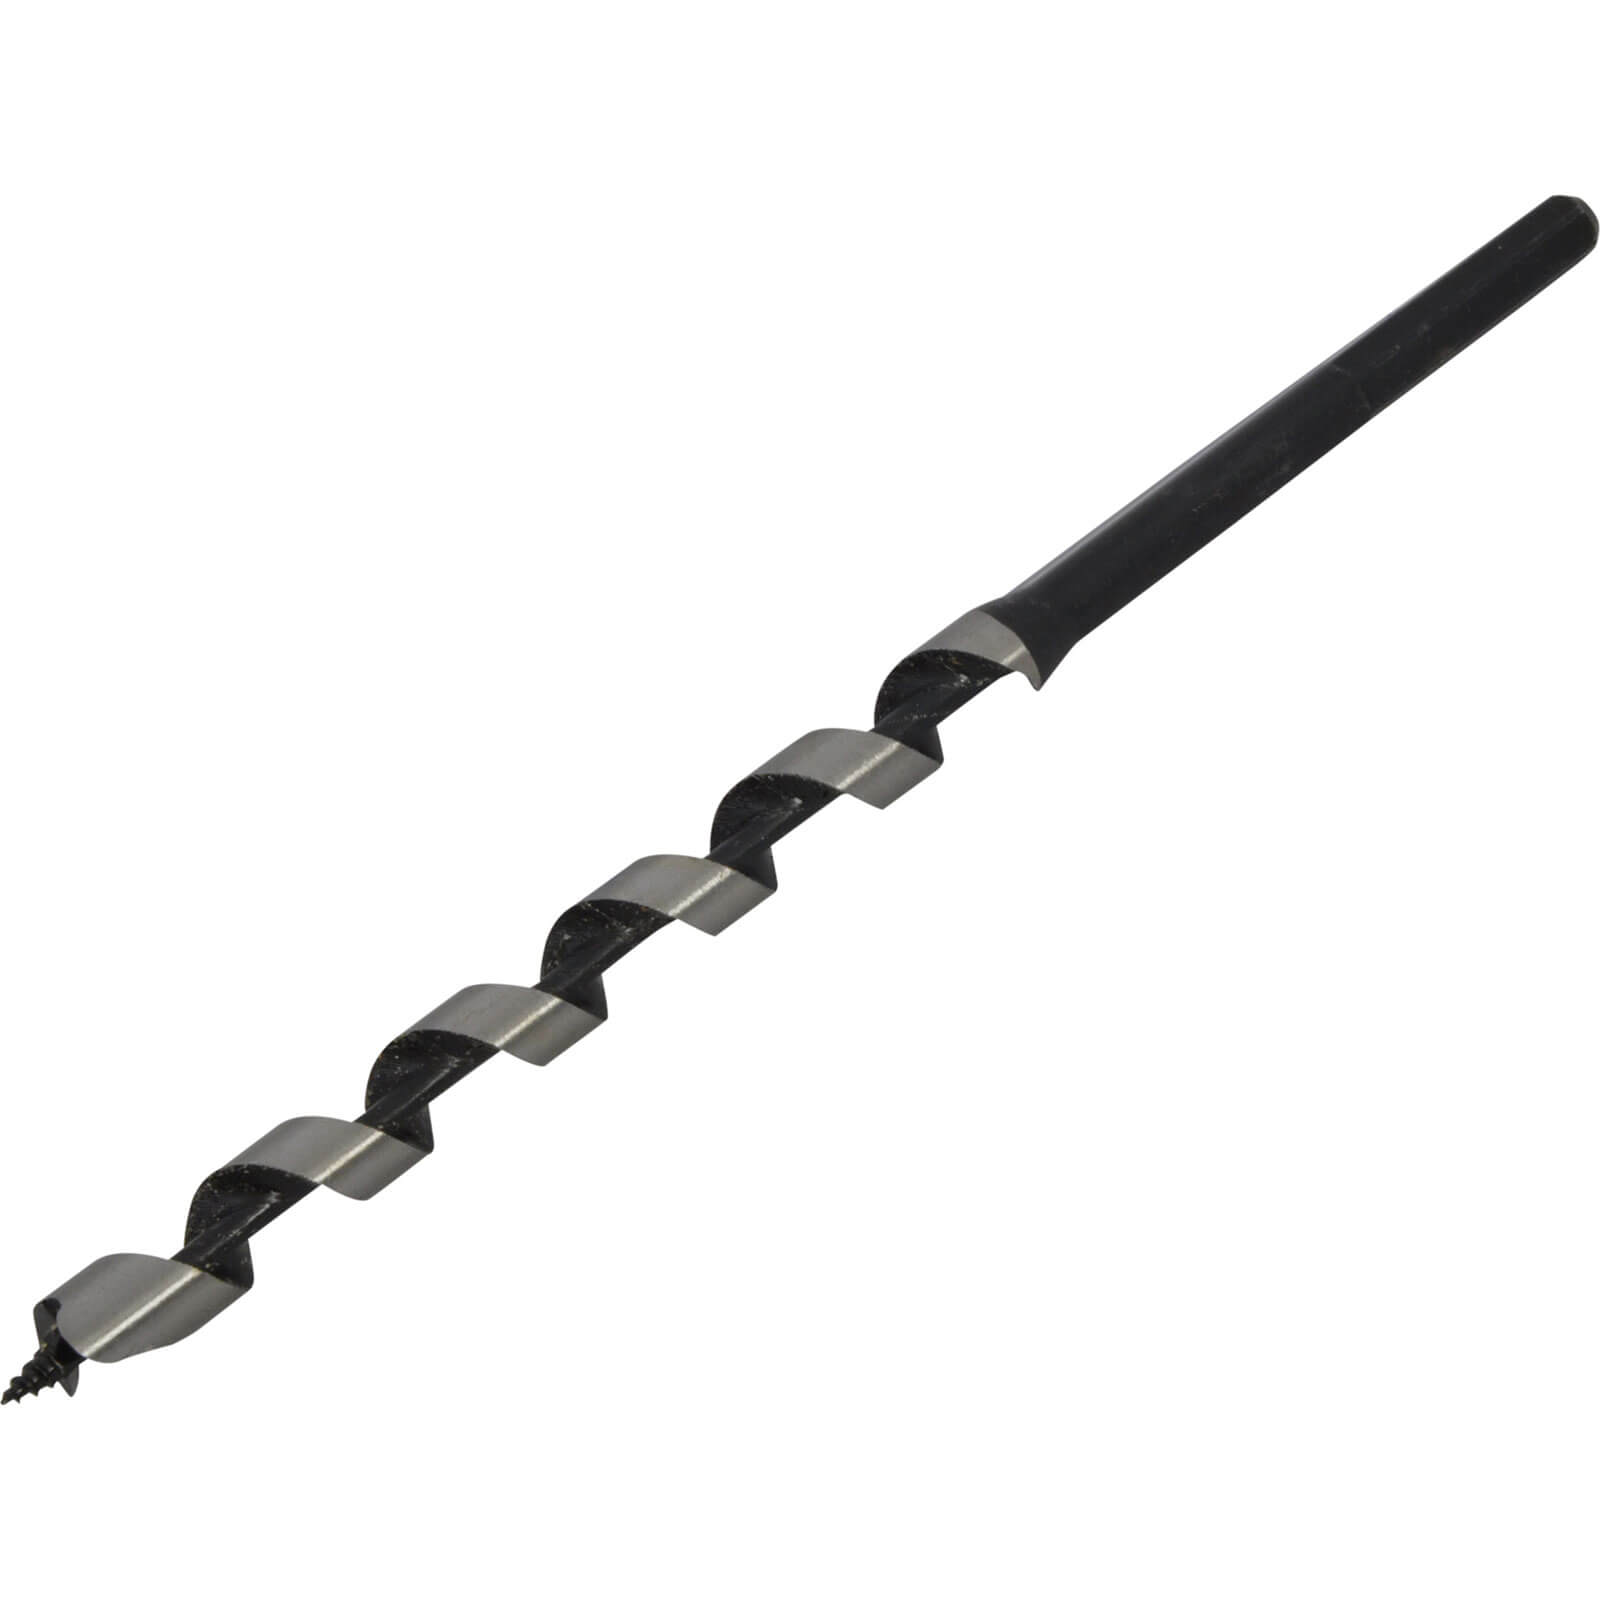 Photo of Bahco Combination Auger Drill Bit 7mm 170mm